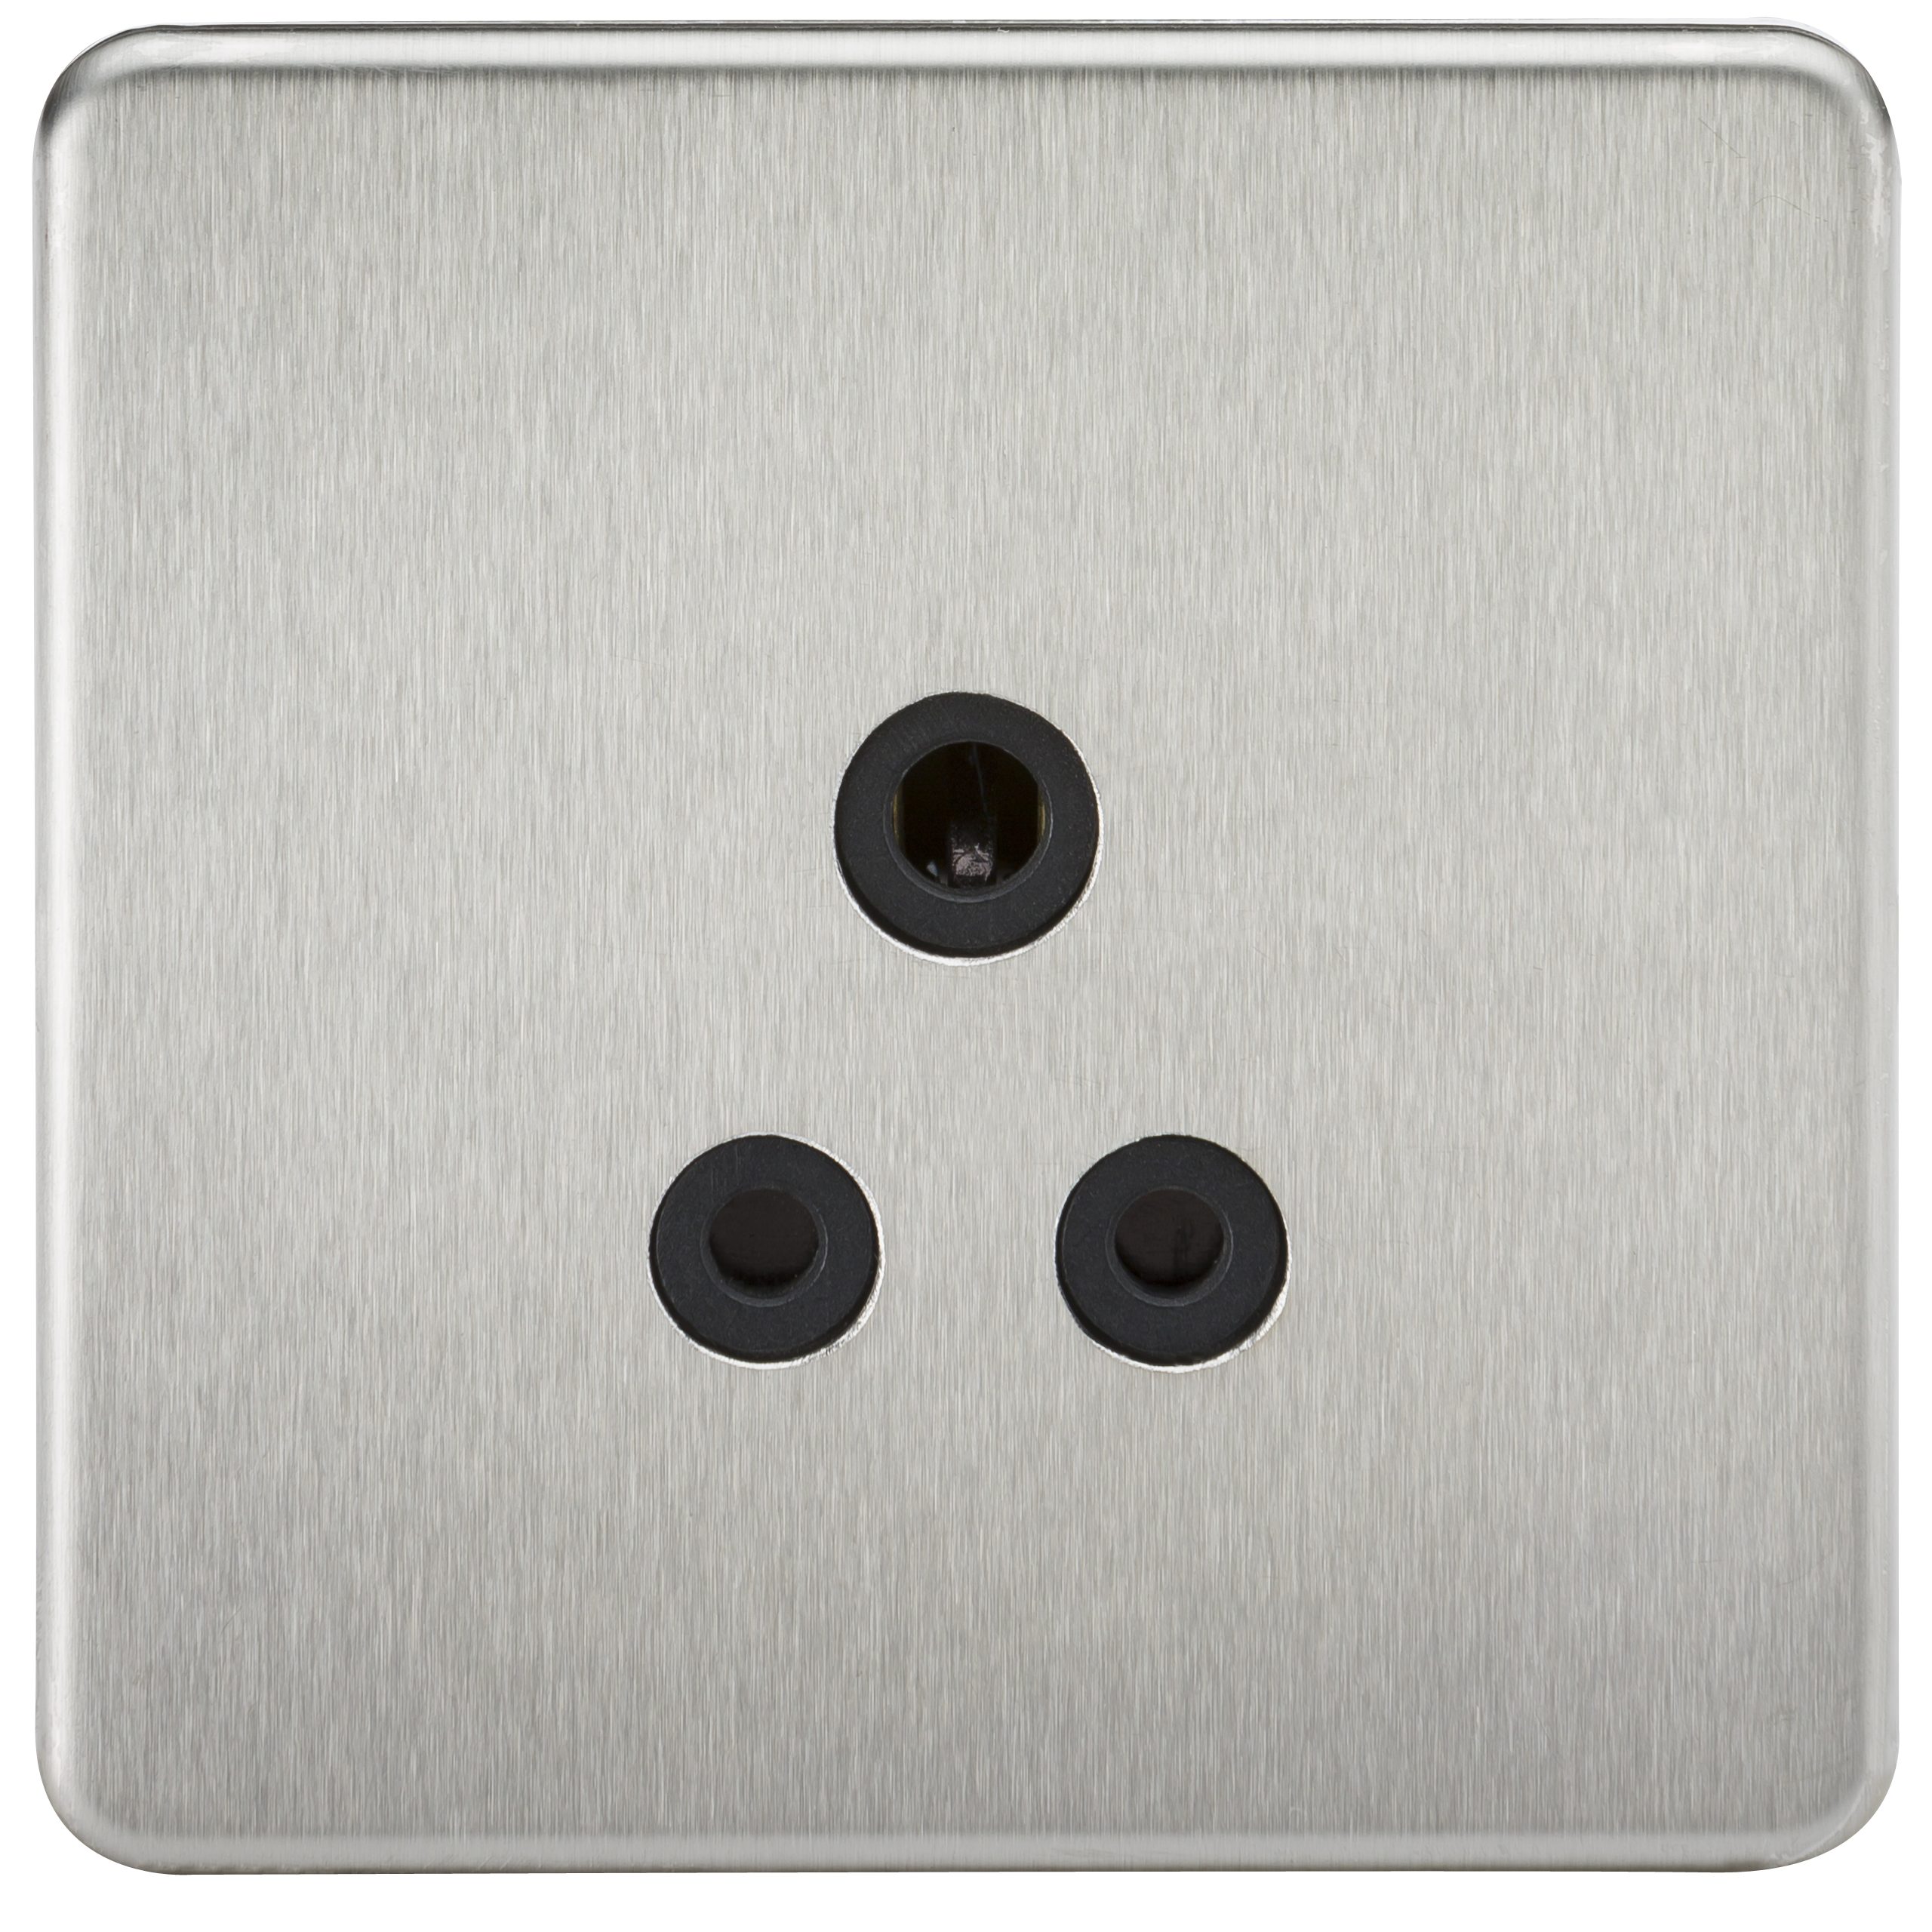 Screwless 5A Unswitched Socket - Brushed Chrome With Black Insert - SF5ABC 